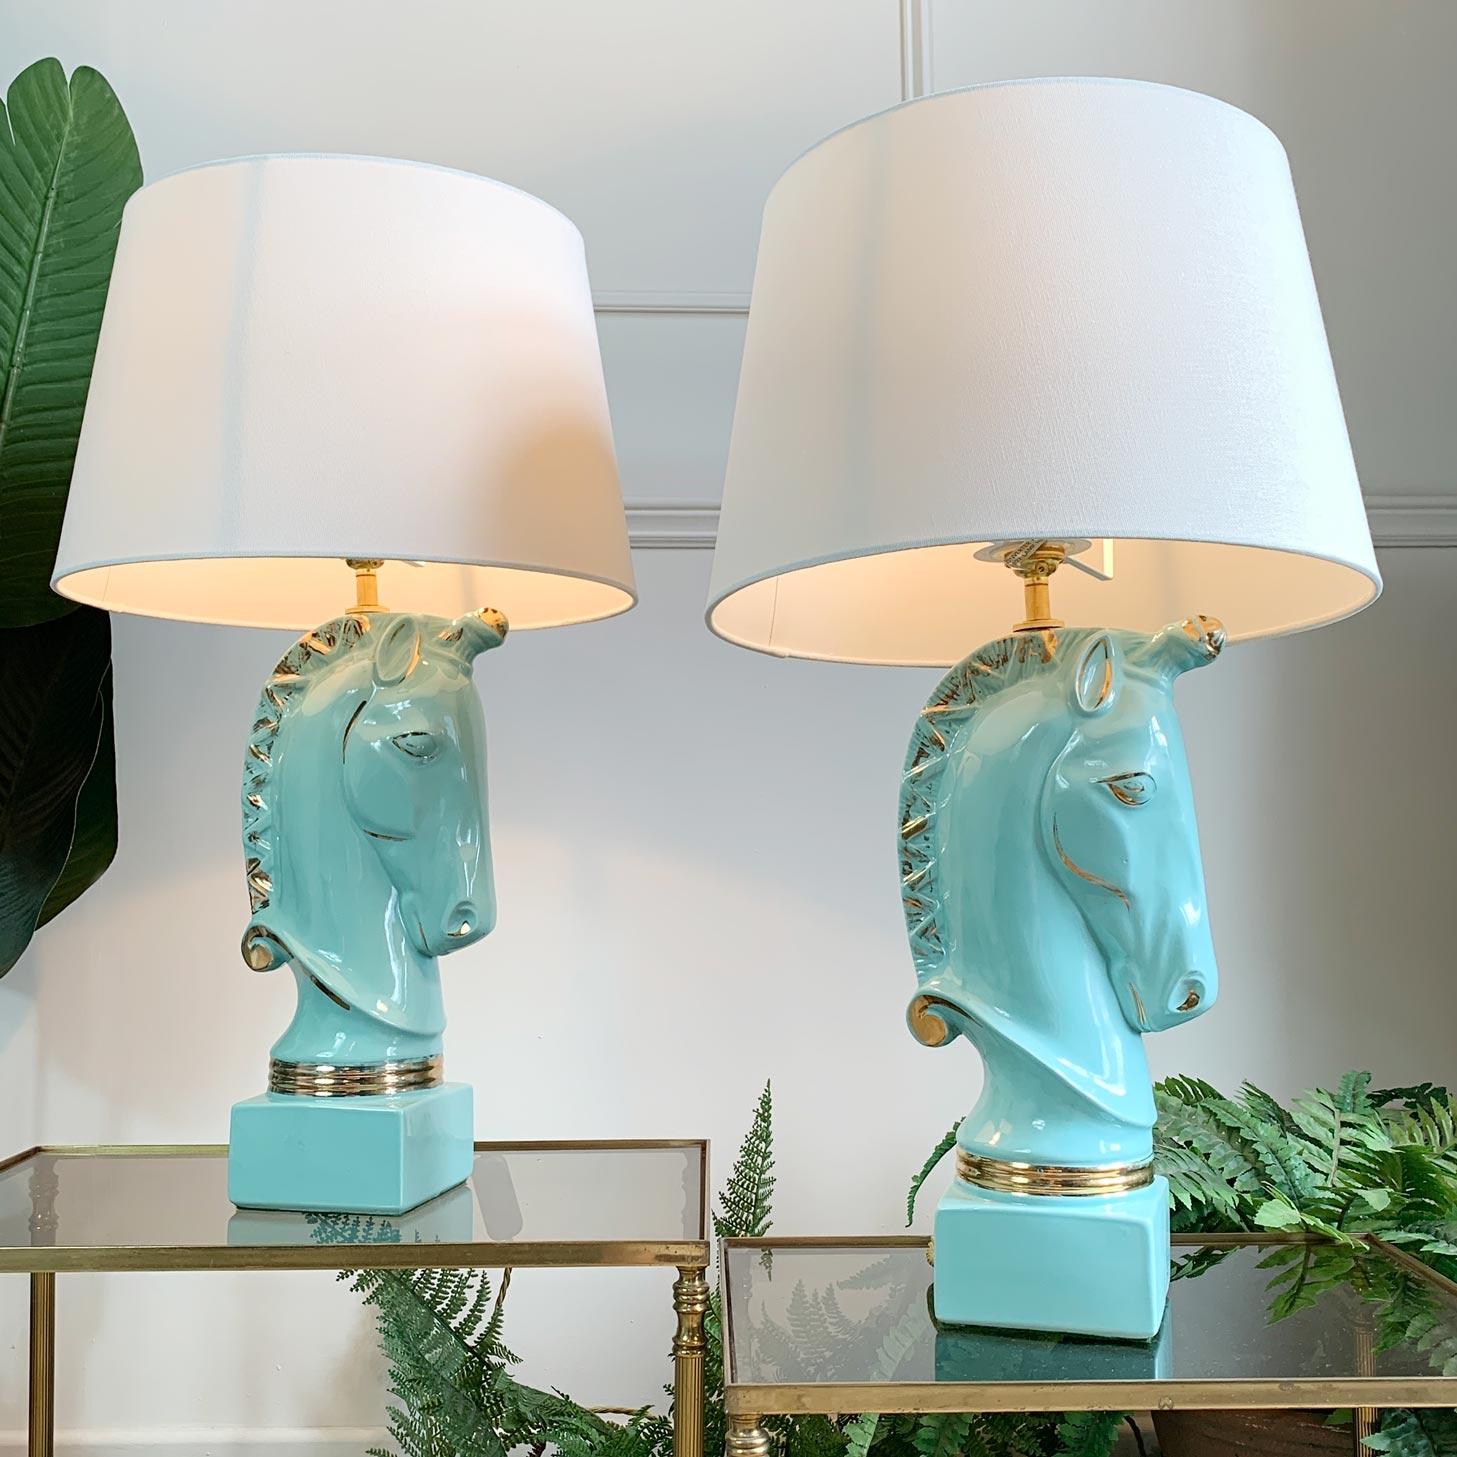 A gorgeous pair of American ceramic lamps, made in the 1950’s by Howell, the turquoise and 24 carat gold detailing on each of the Unicorn lamps exudes opulence and glamour. These are from the Howell ‘Embassy’ range, they featured prominently in a